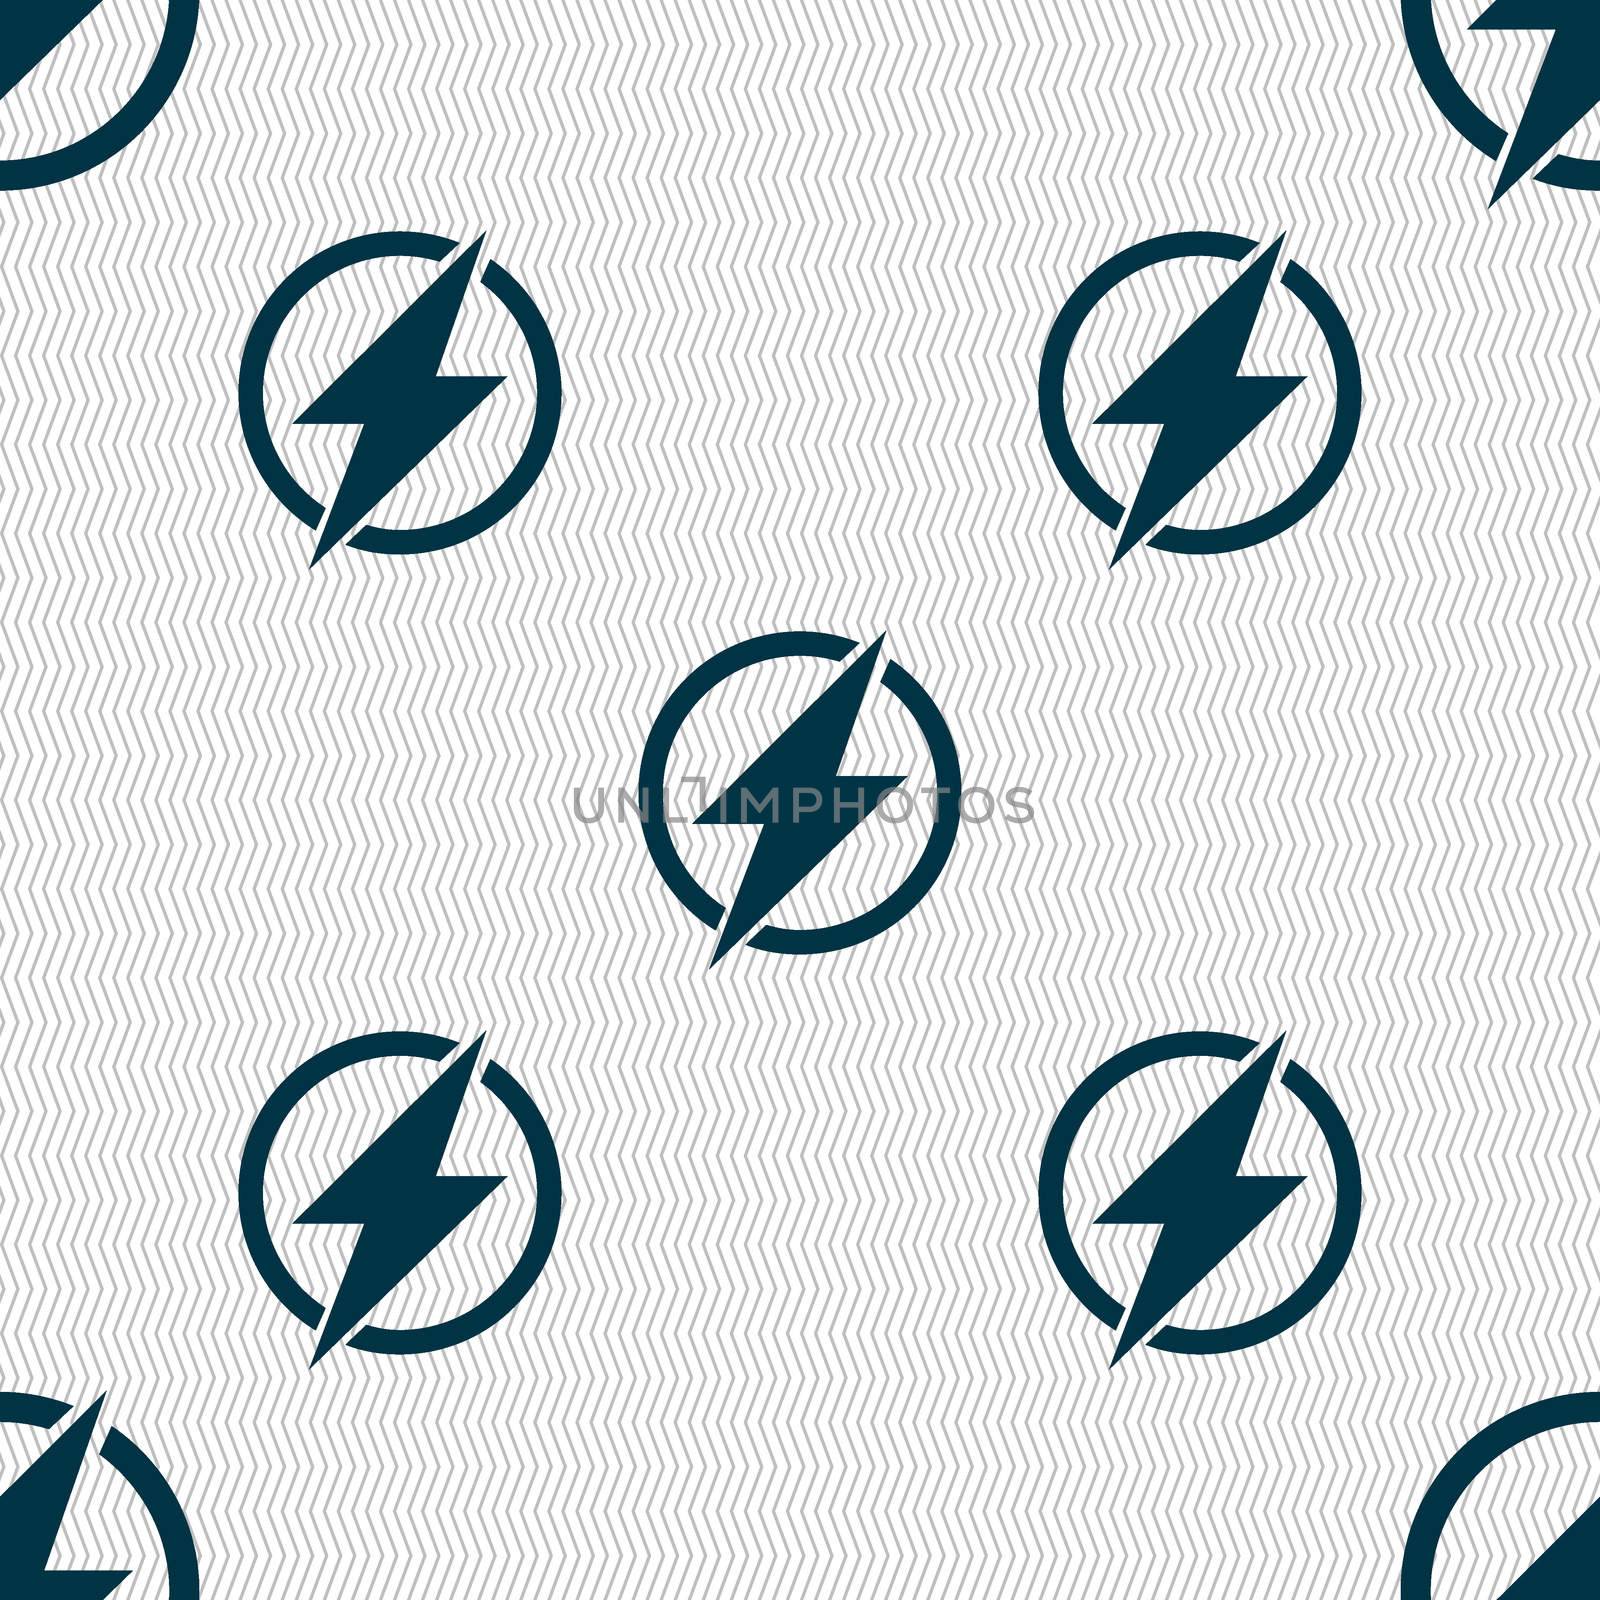 Photo flash sign icon. Lightning symbol. Seamless abstract background with geometric shapes.  by serhii_lohvyniuk